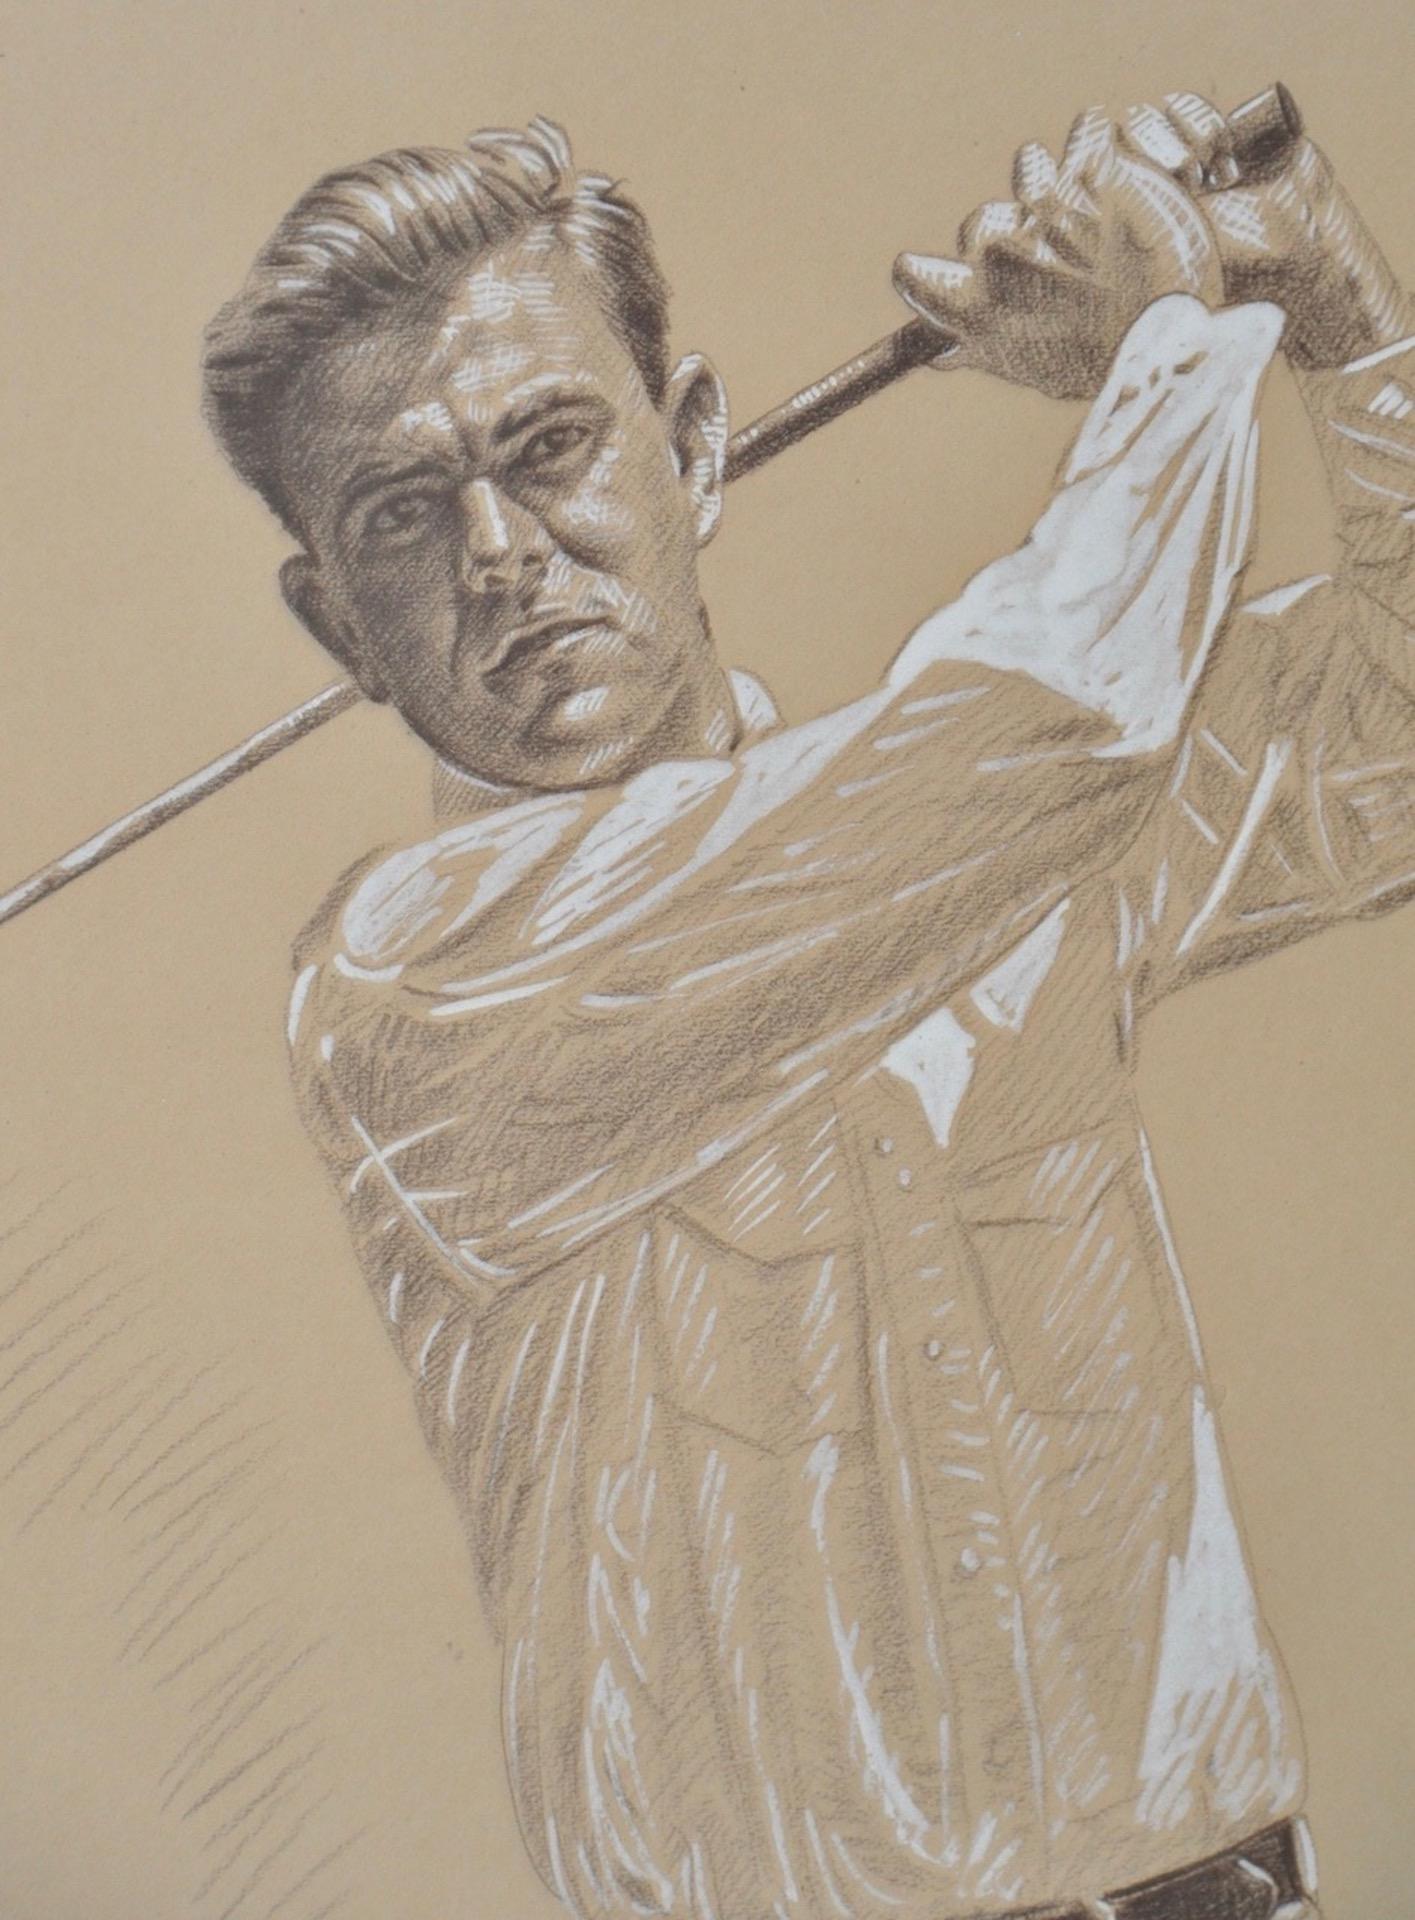 Vintage Graphite & Gouache Golfing Illustration by A.D. Mills c.1933

A young man in full swing.

Original illustration signed and dated.

Dimensions 17.5